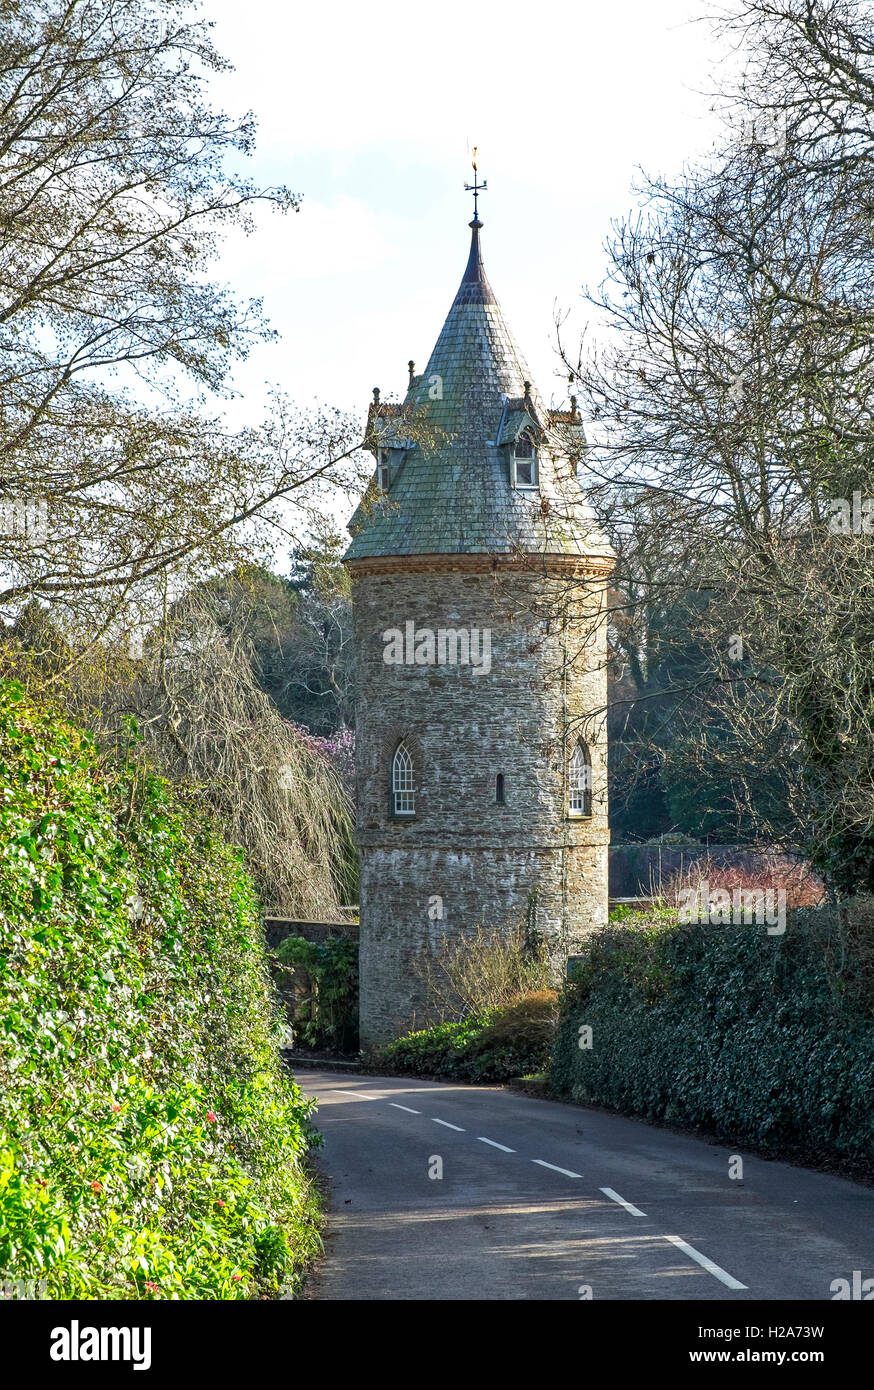 The old water tower at trelissick in cornwall, uk, this image was taken from the public highway outside of the property. Stock Photo